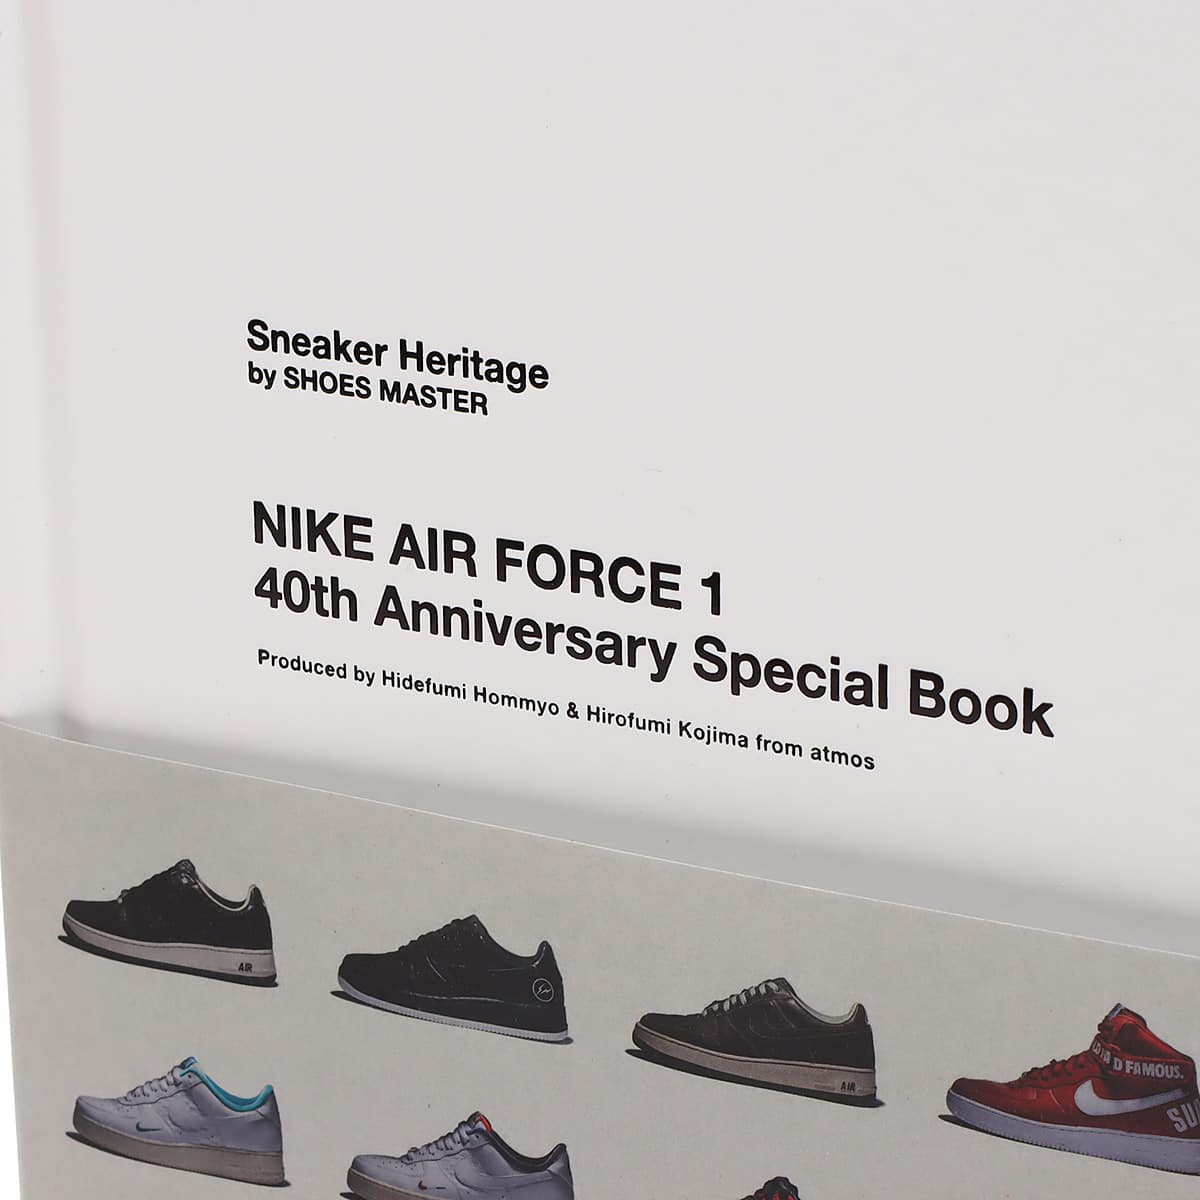 Sneaker Heritage by SHOES MASTER 